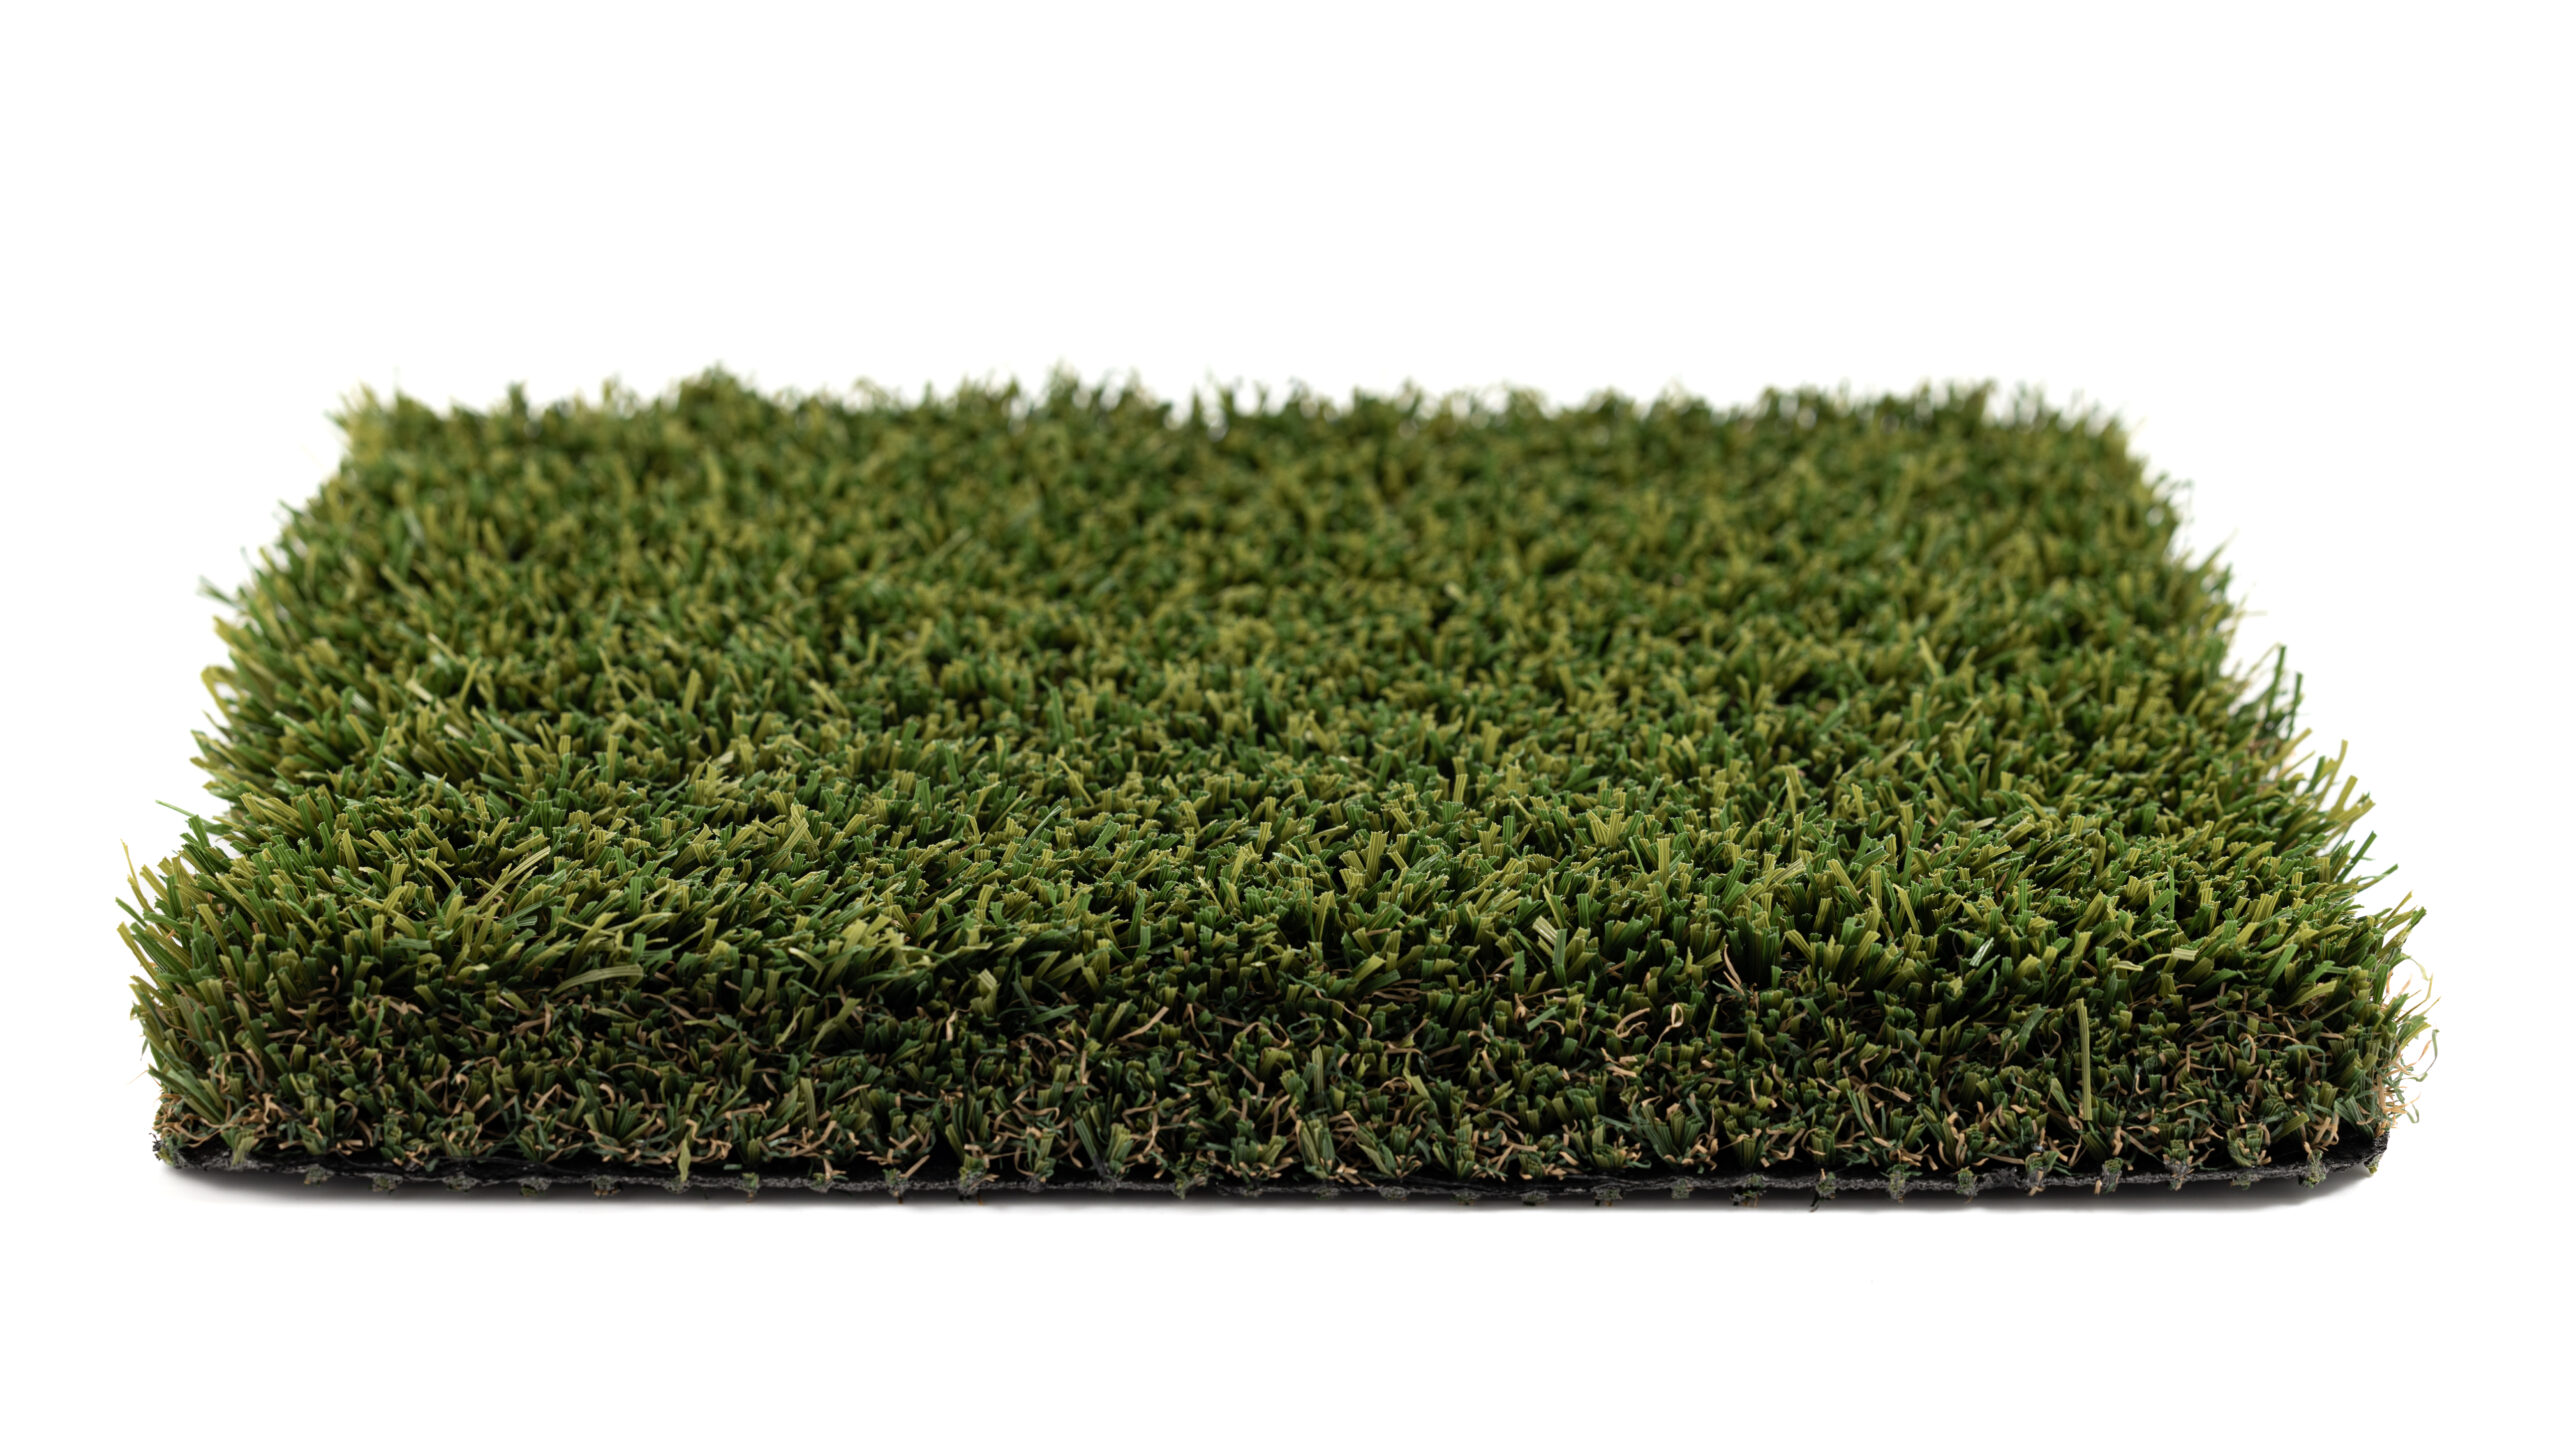 LQ Premium Grass Blades Synthetic Artificial Turf Forest Green Top Side